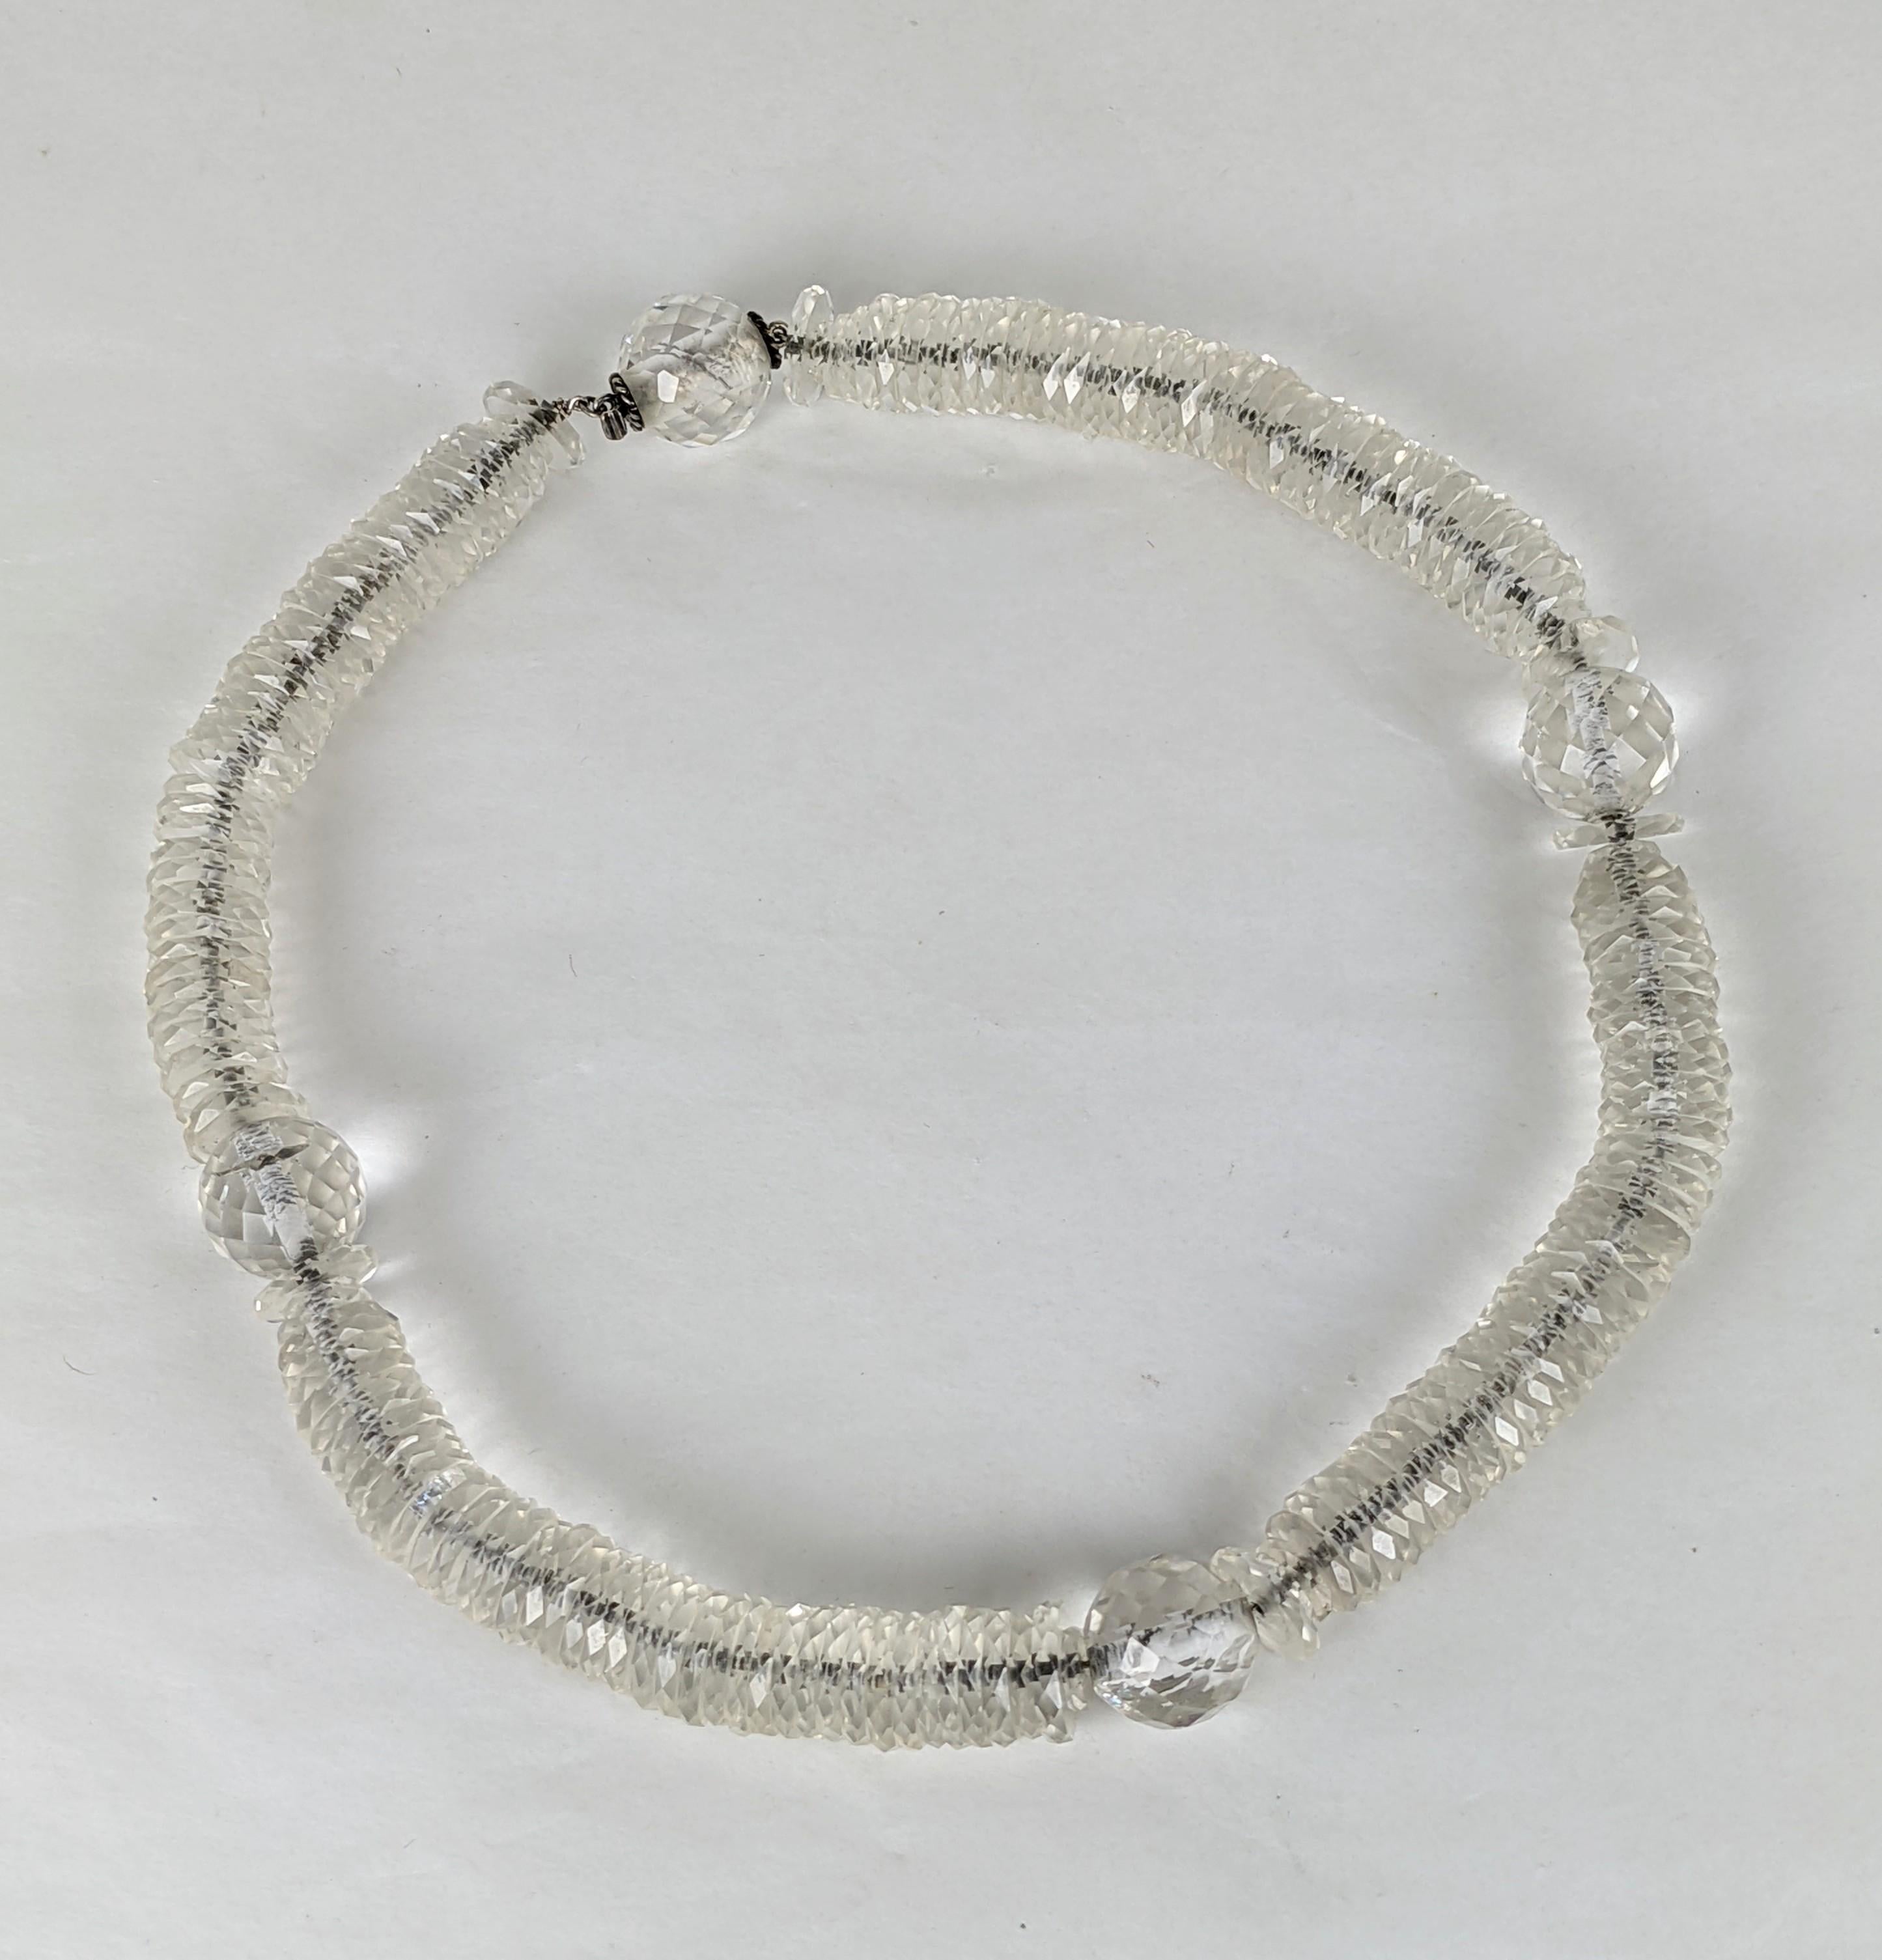 Unusual French Art Deco faceted crystal multi rondelle and bead necklace. The necklace strung on fine silver chain. Unusual invisible silver bead clasp with a fluid elegant look.
Excellent Condition. Length 16